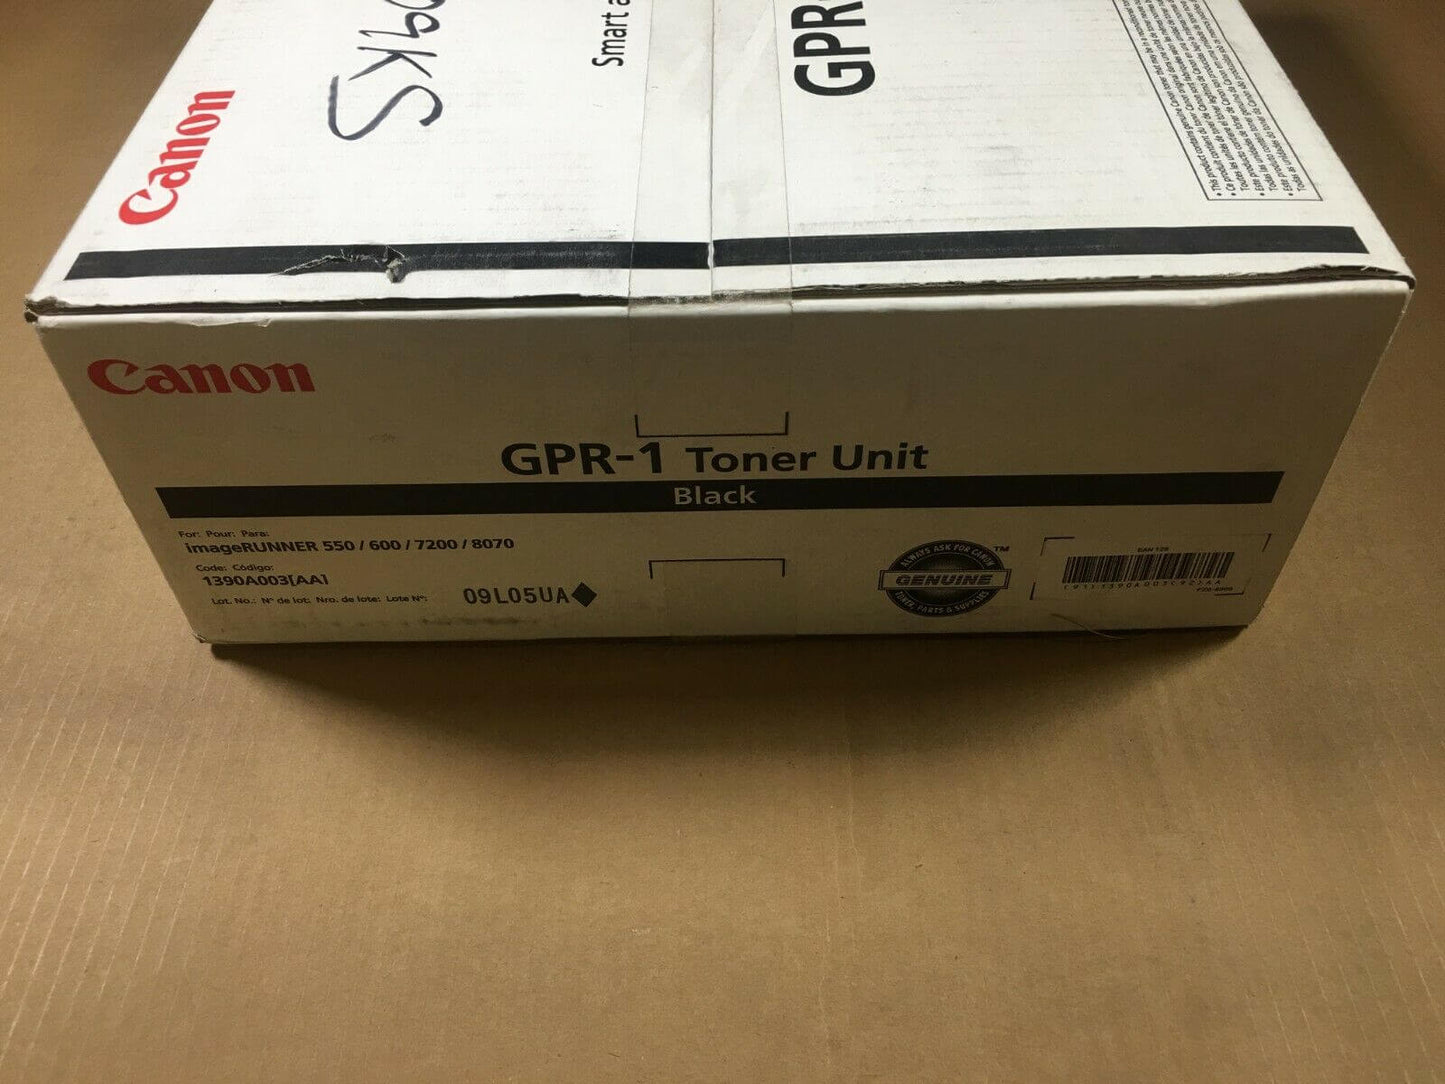 Genuine Canon GPR-1 Black Toner For iR 550 600 7200 8070 Same Day Shipping - copier-clearance-center